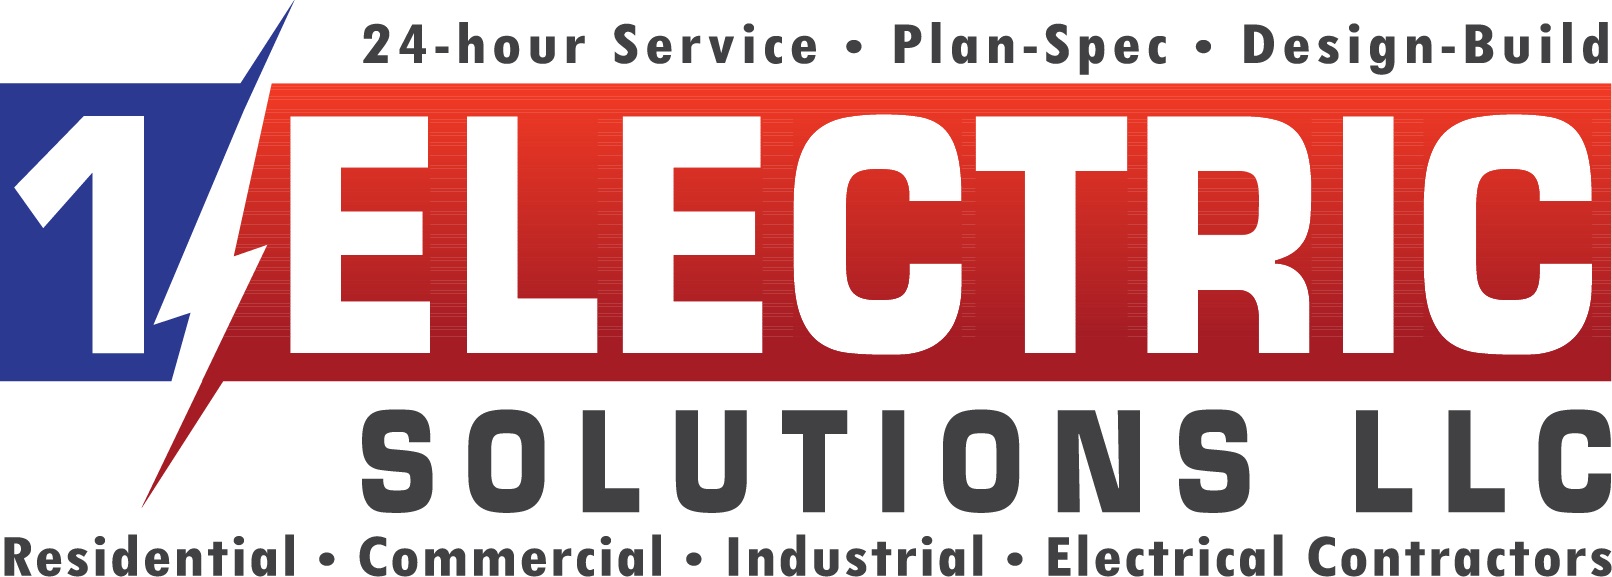 1 Electric Solutions Blog